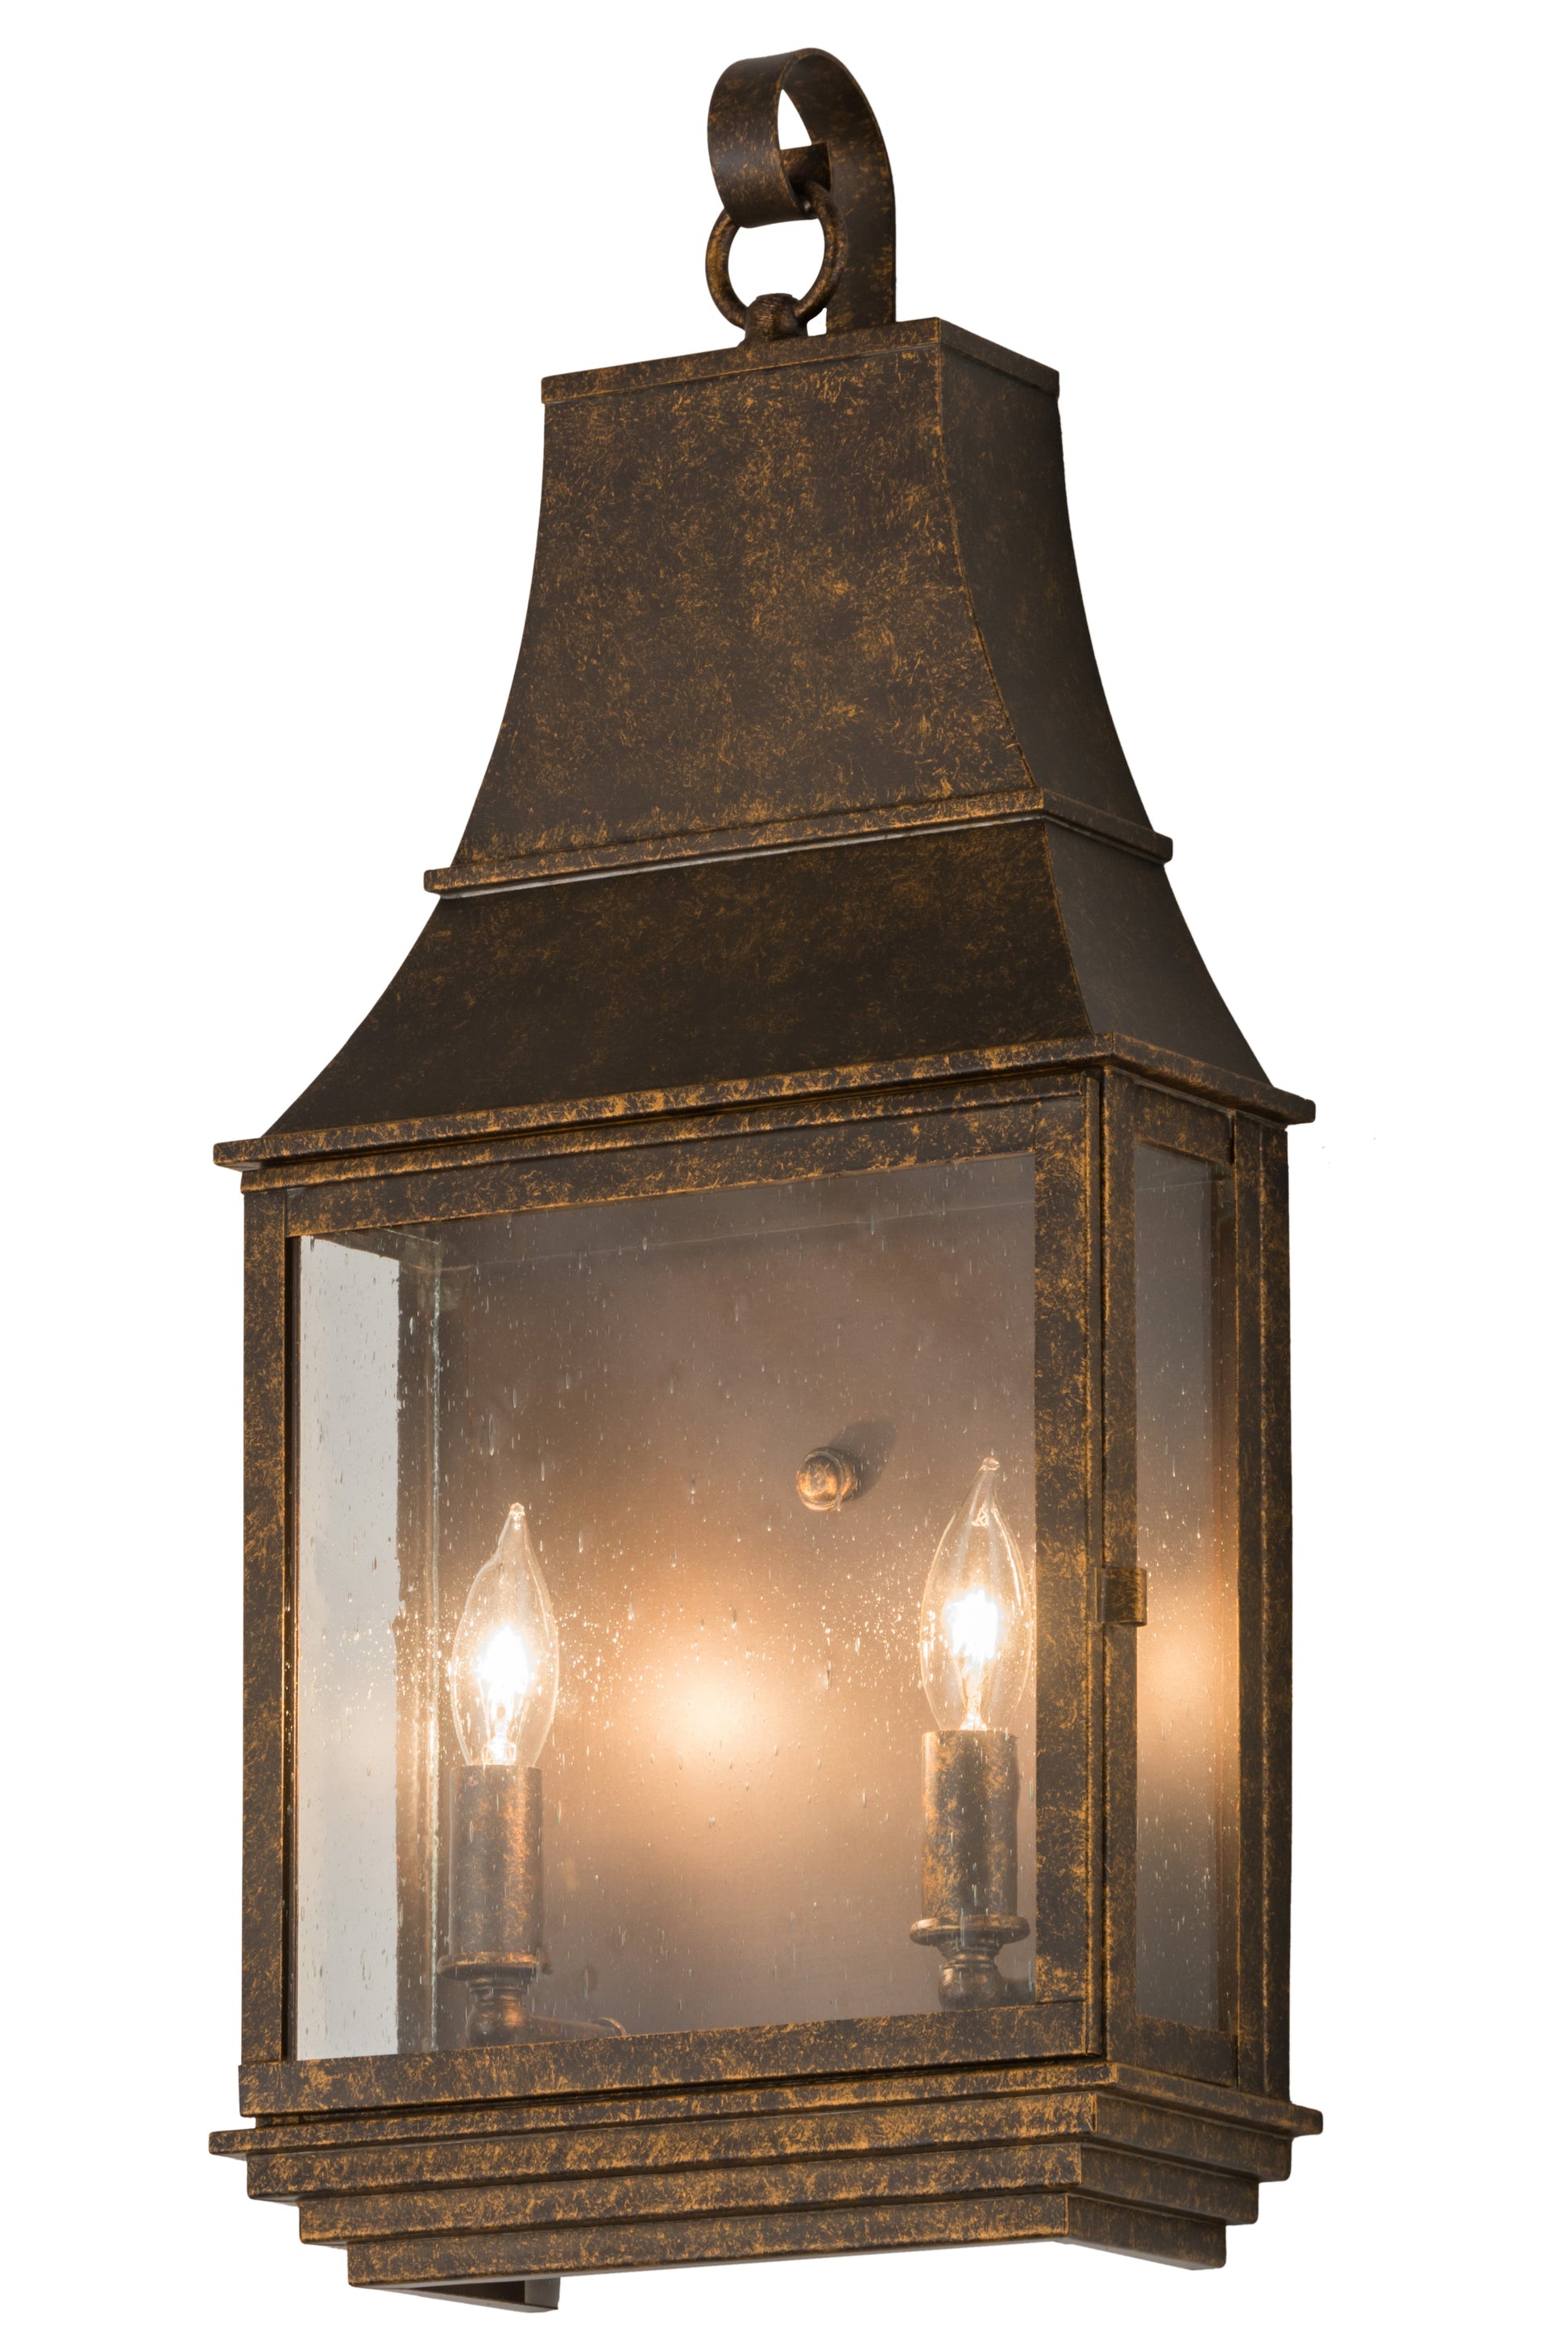 10" Bastille Lantern Wall Sconce by 2nd Ave Lighting